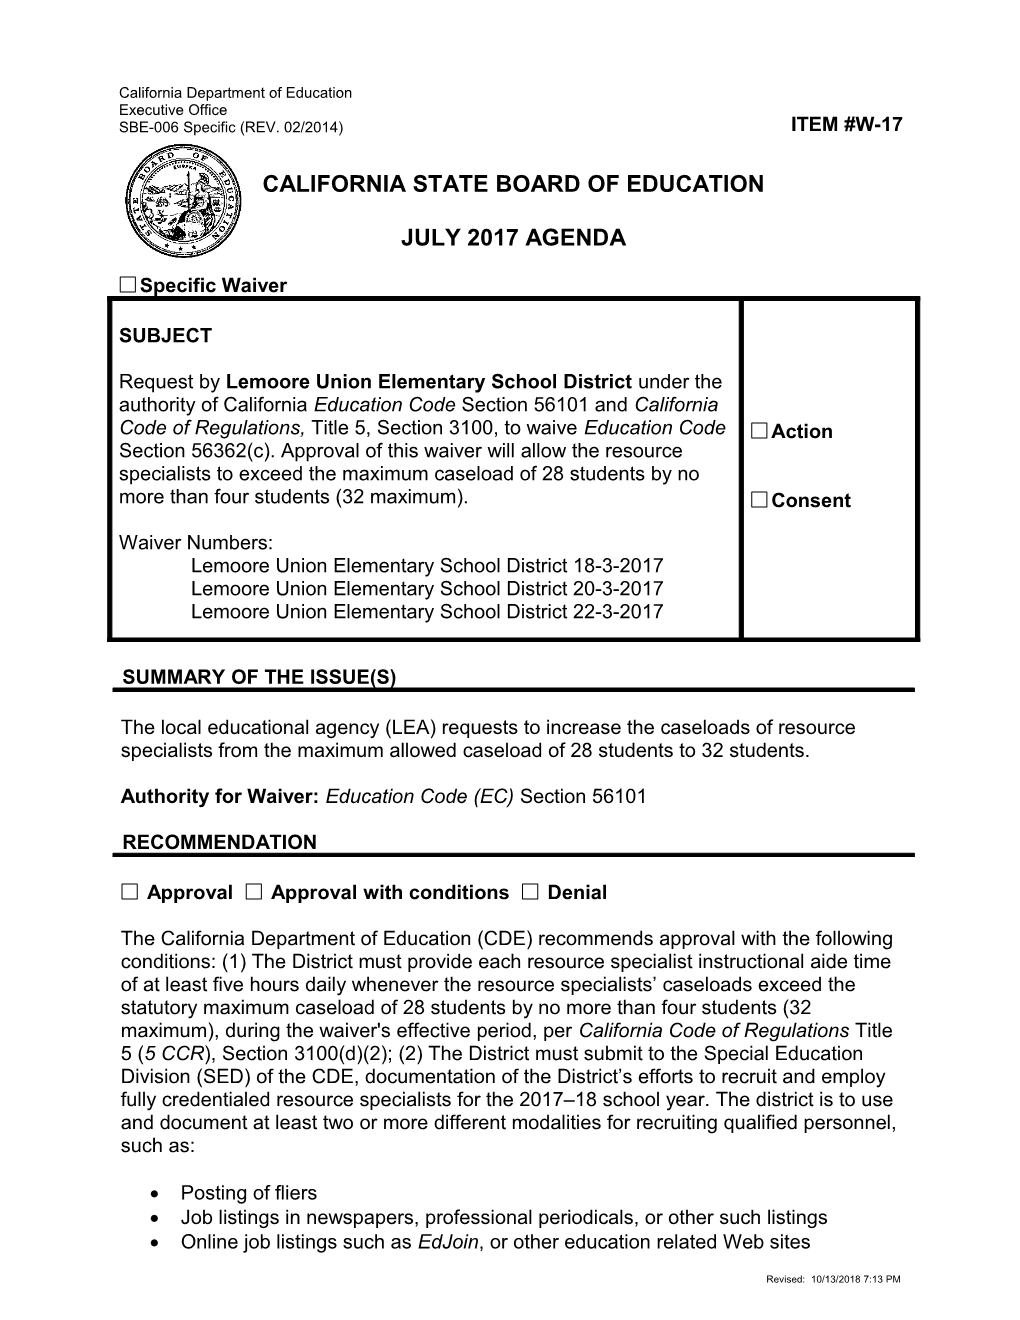 July 2017 Waiver Item W-17 - Meeting Agendas (CA State Board of Education)